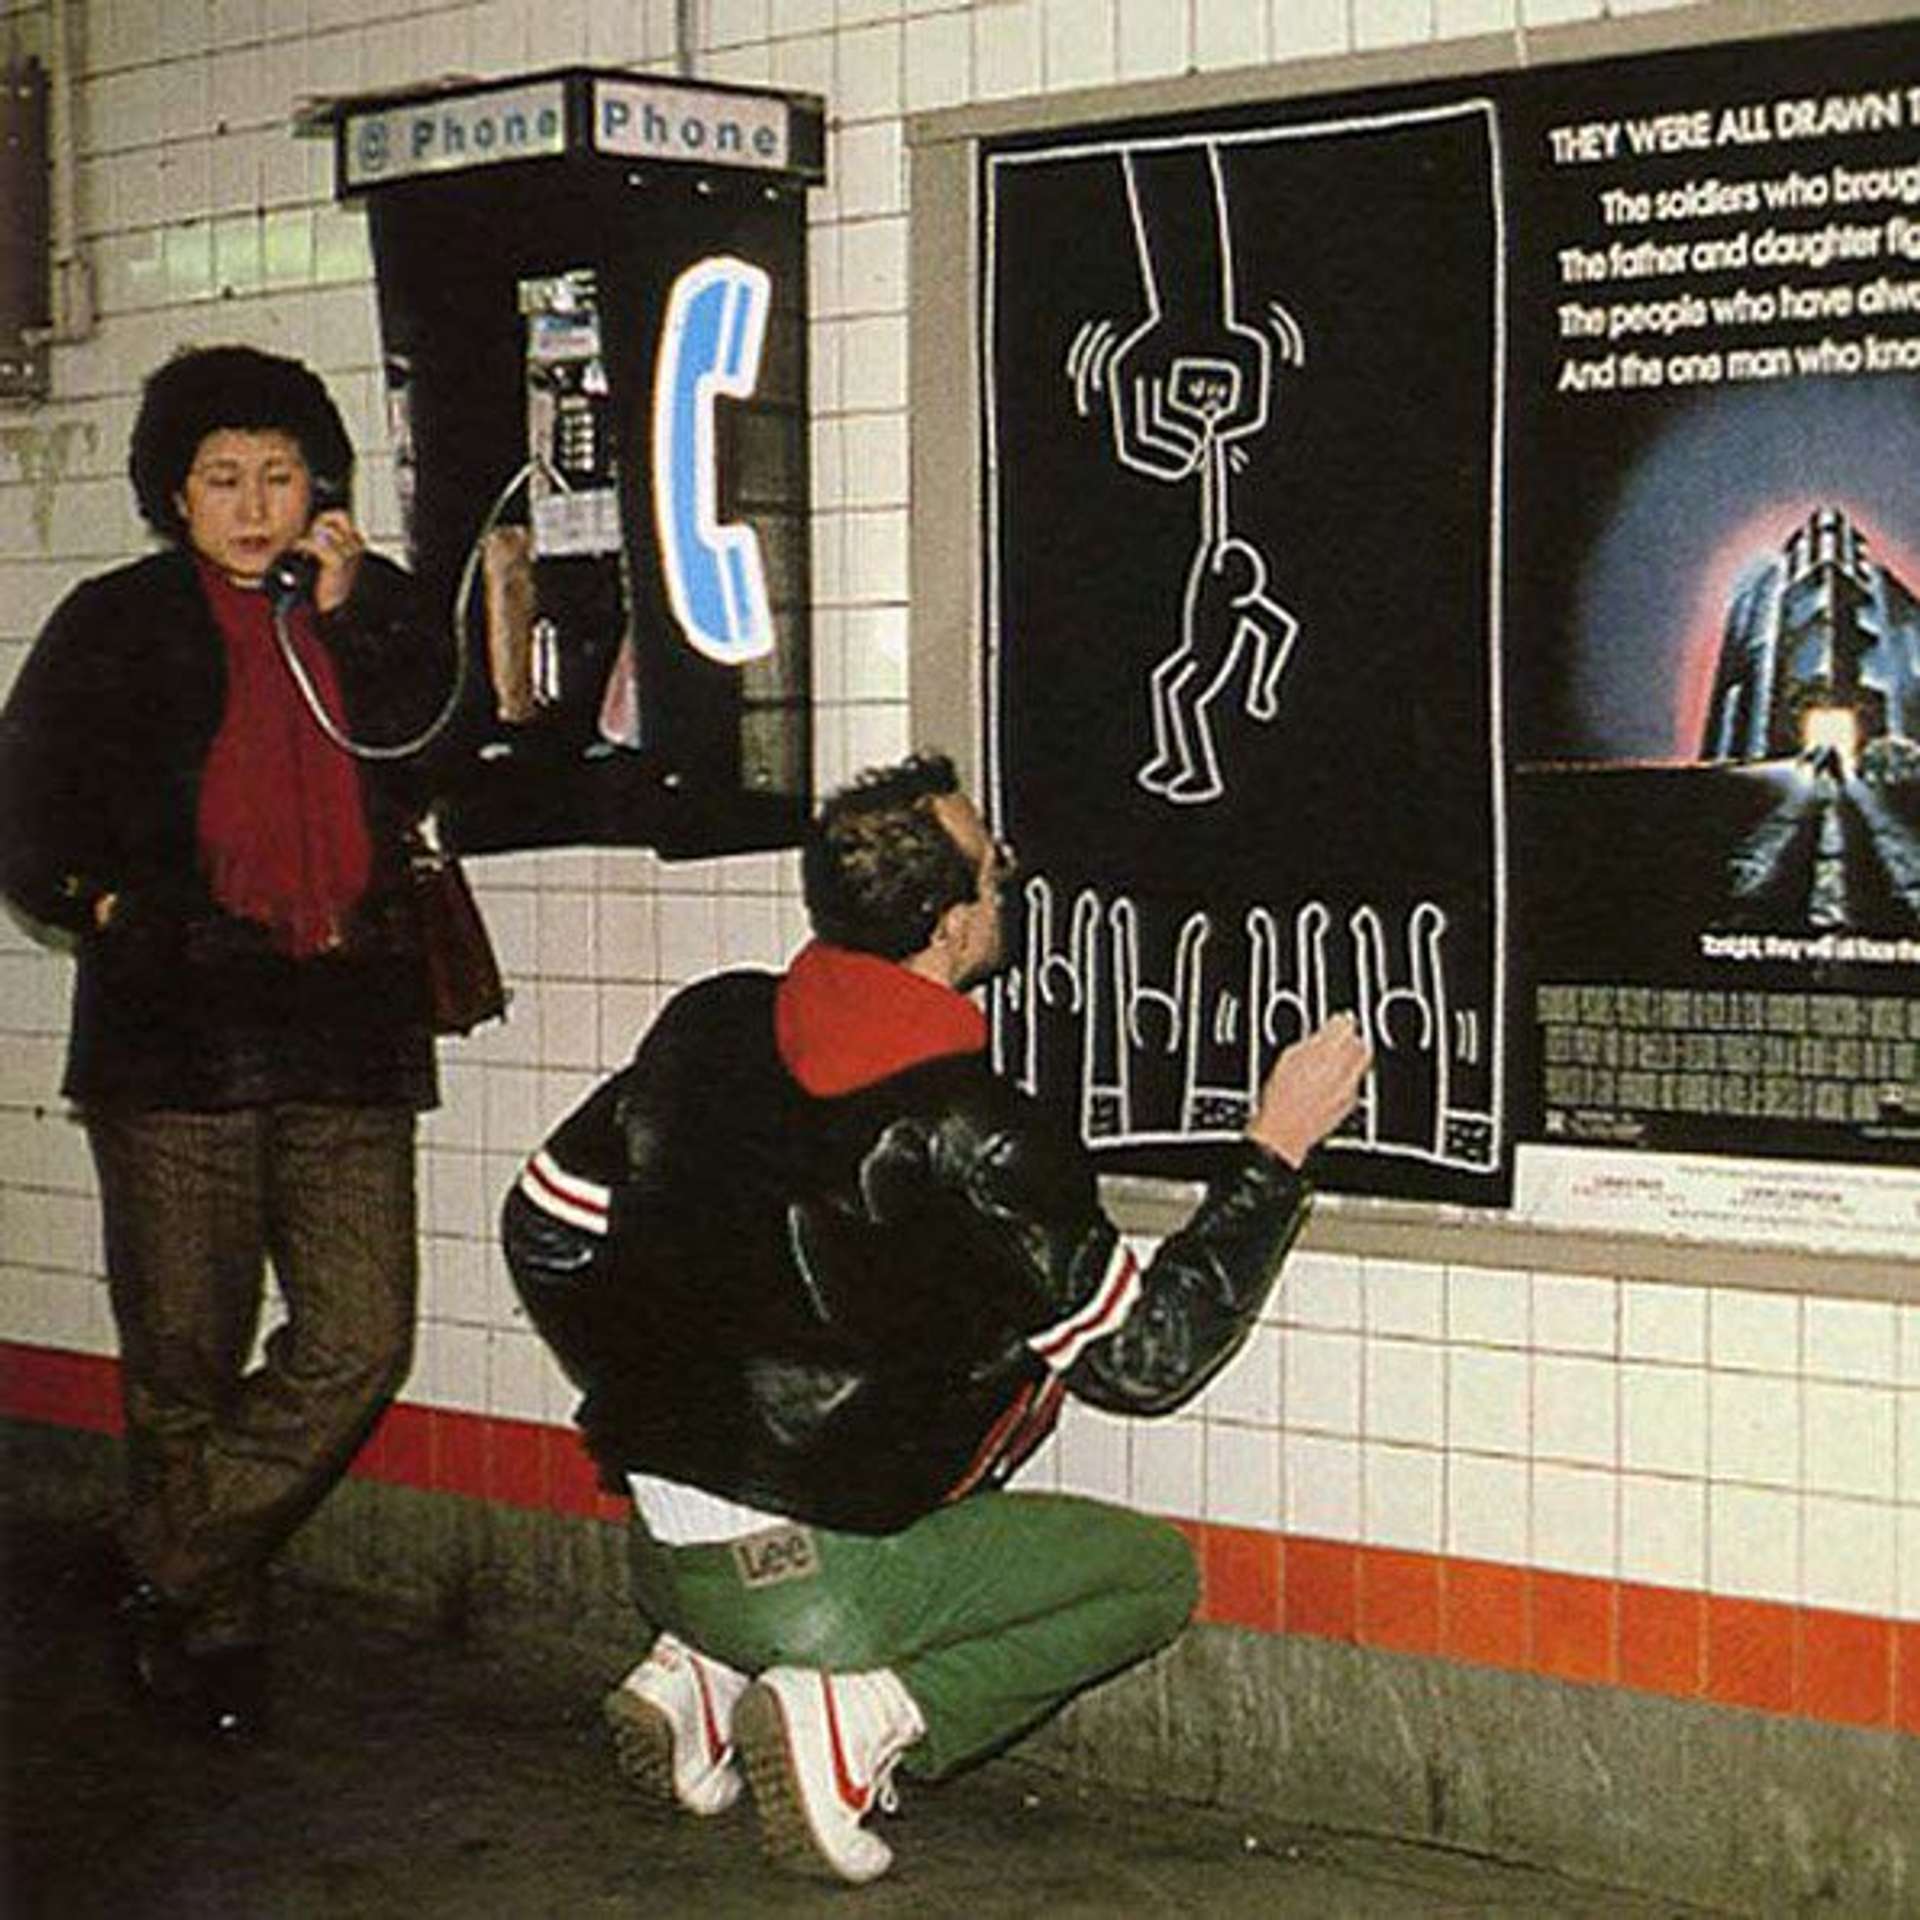 Keith Haring working in the New York subway